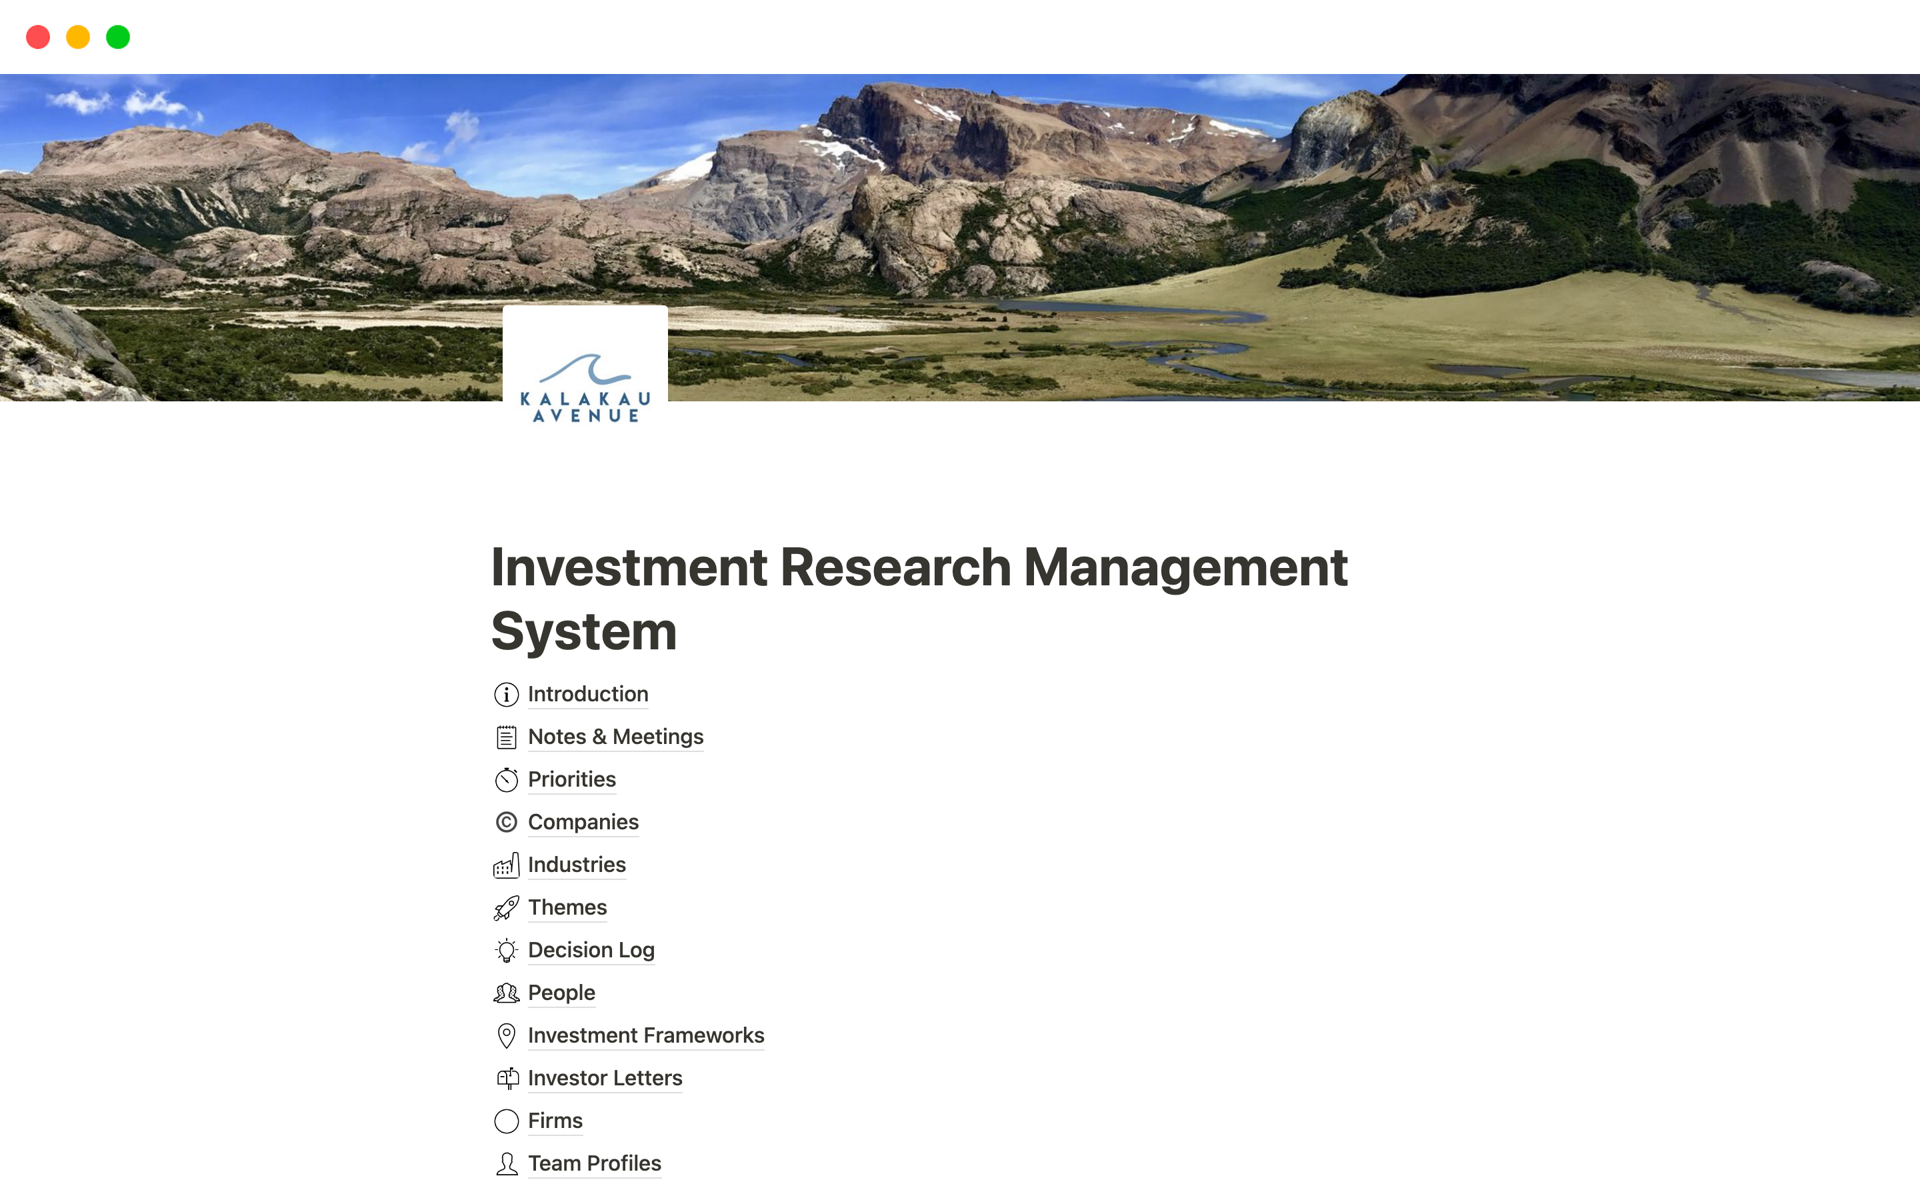 Mallin esikatselu nimelle Investment Research Management System